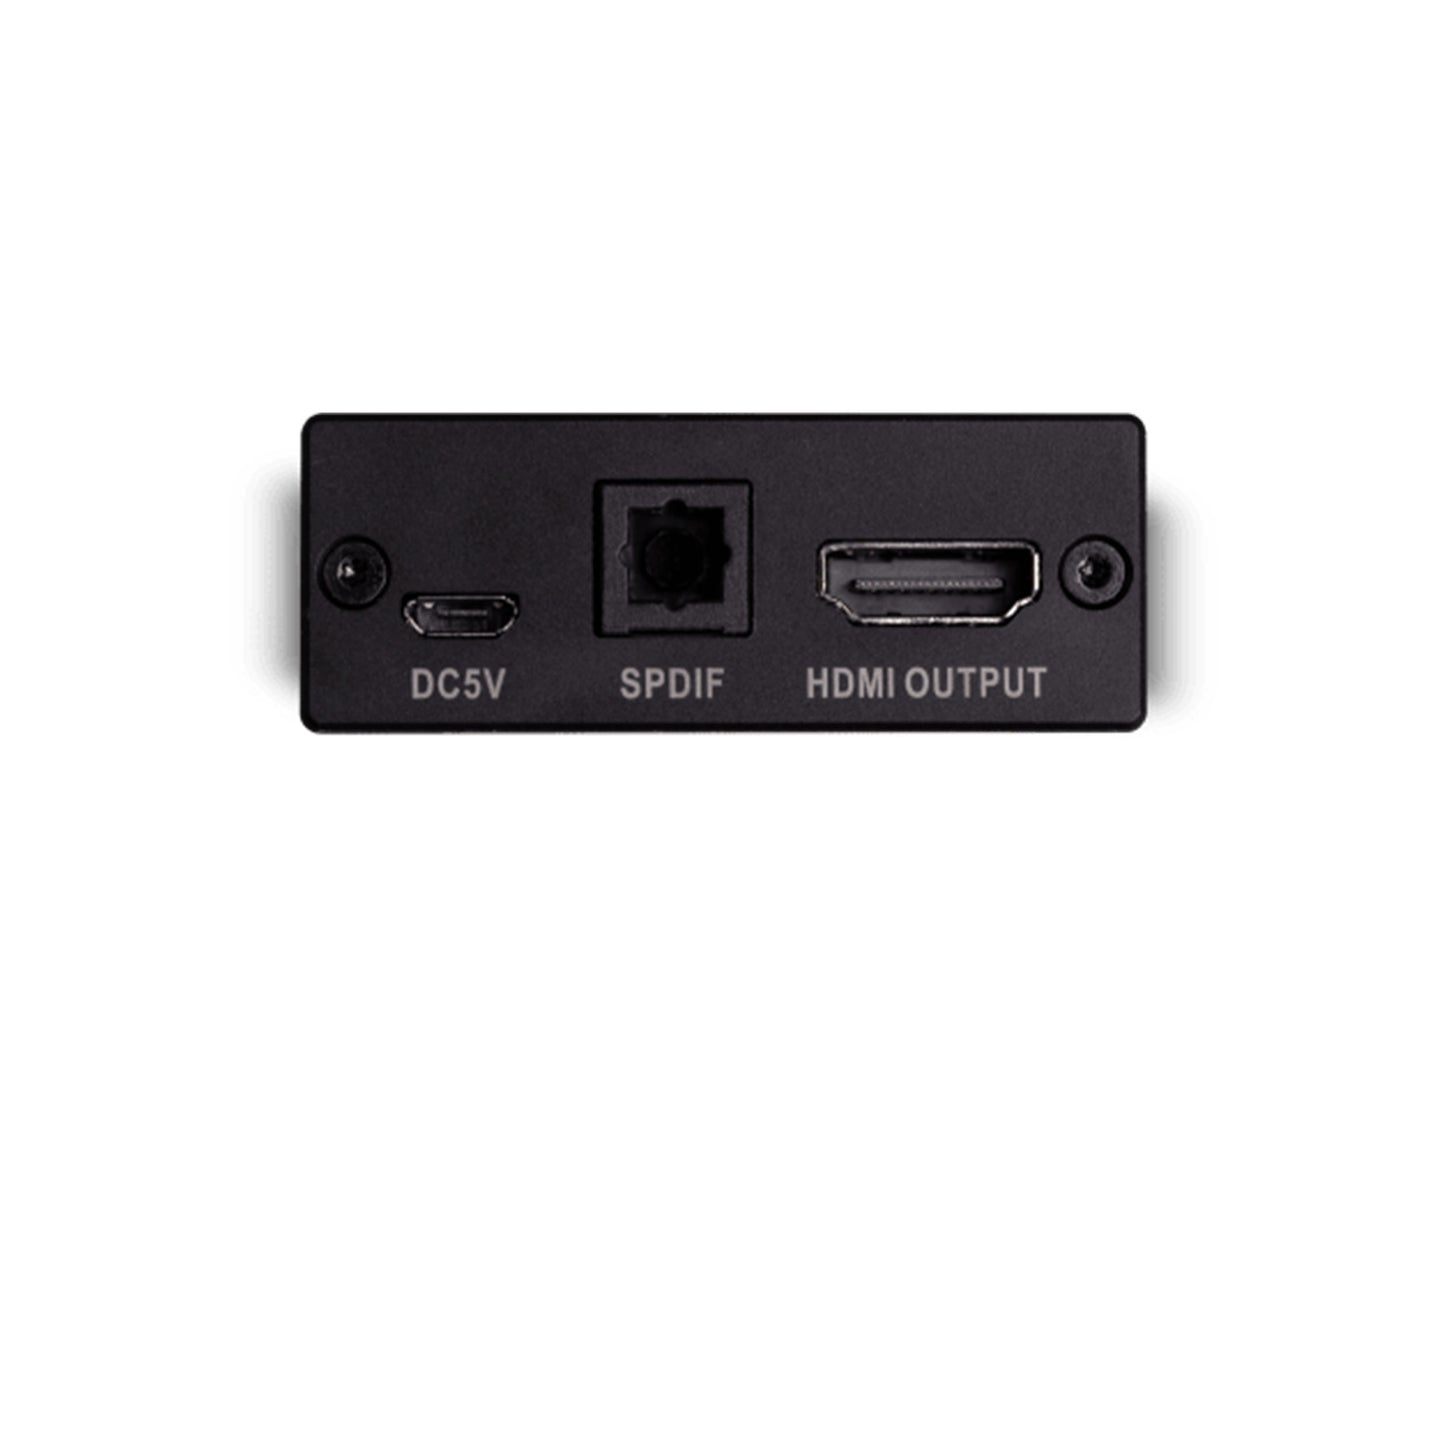 HDMI ADAPTER FOR PLAYSTATION 5